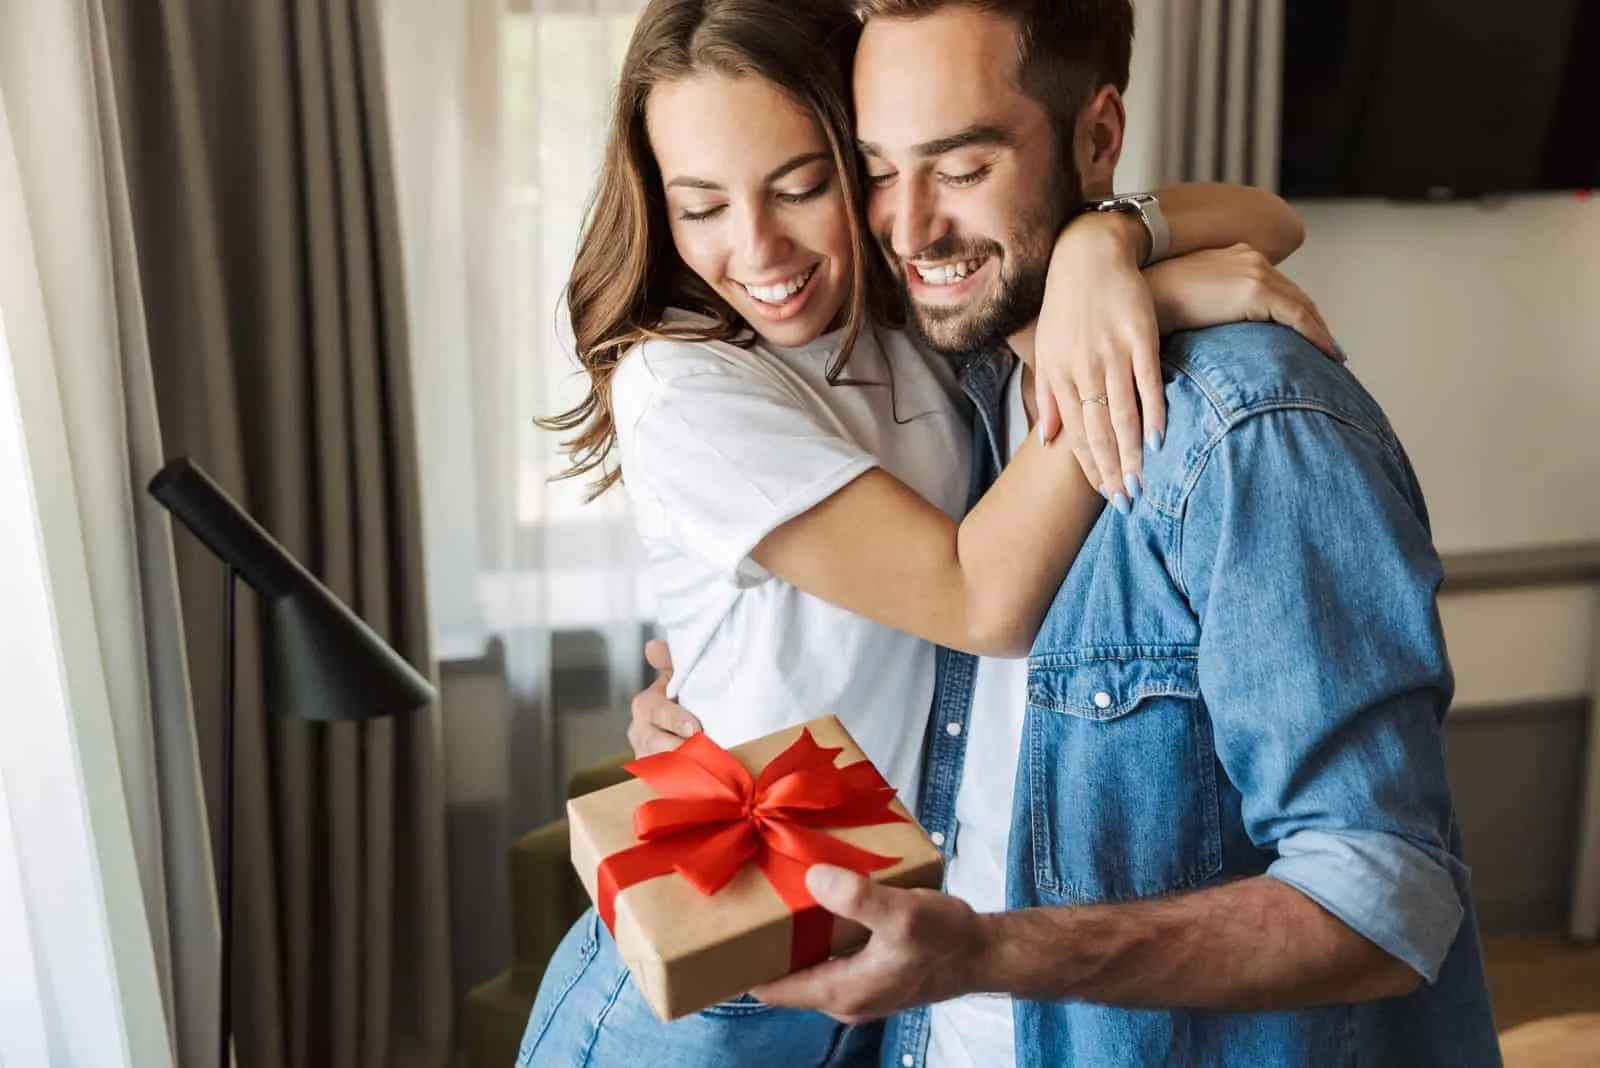 smiling man and woman embracing while he holds a gift